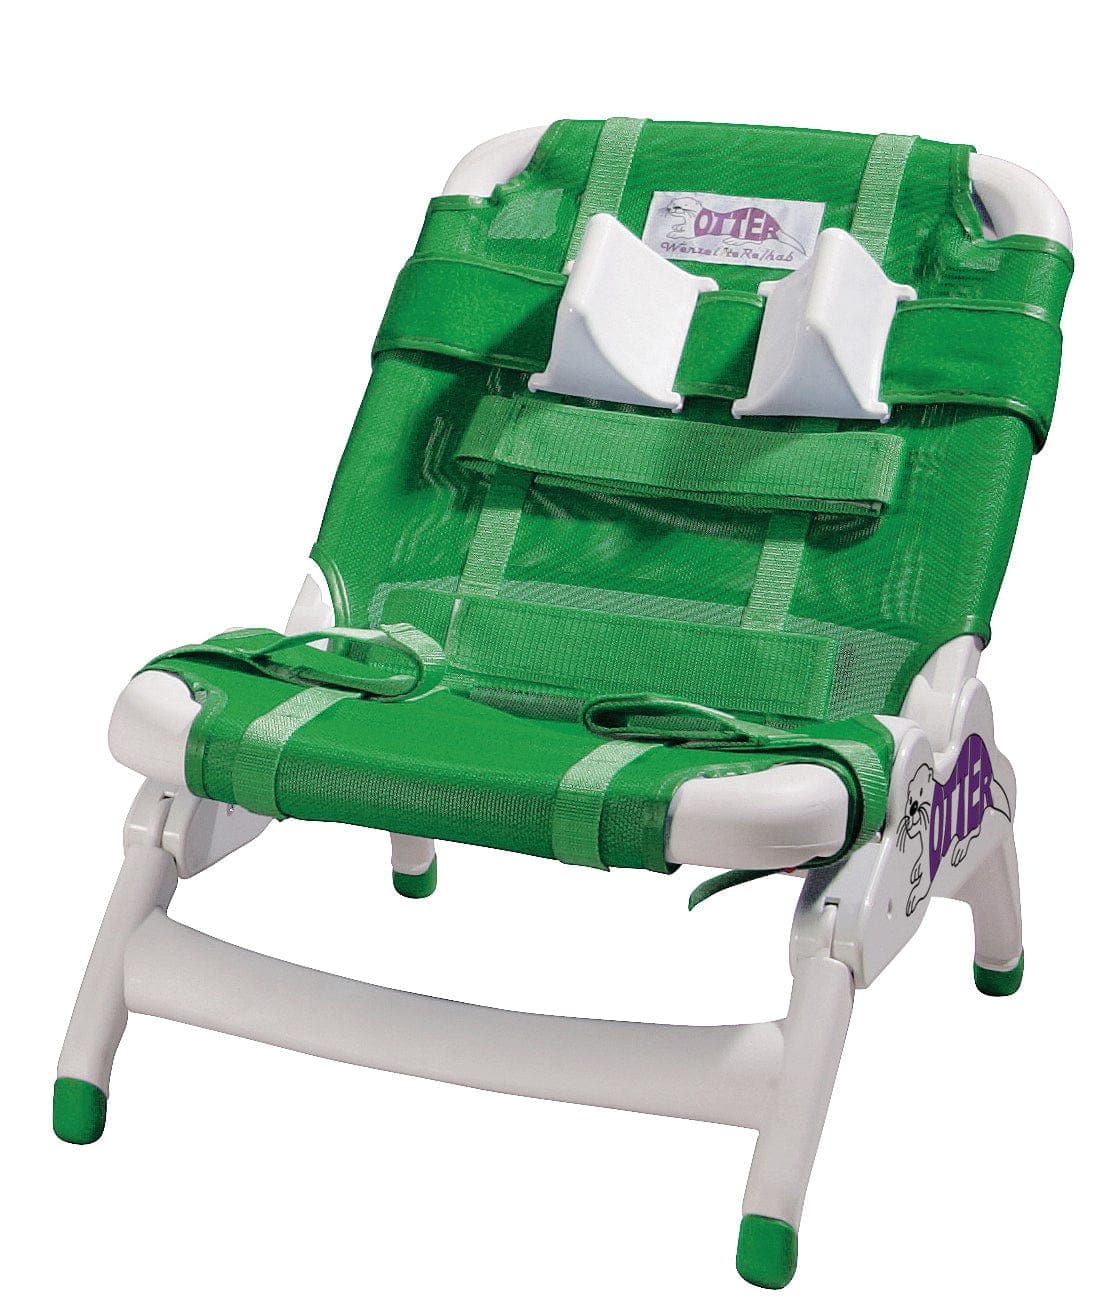 Drive Medical Pediatric Rehab Without Tub Stand / Small Drive Medical Otter Pediatric Bathing System